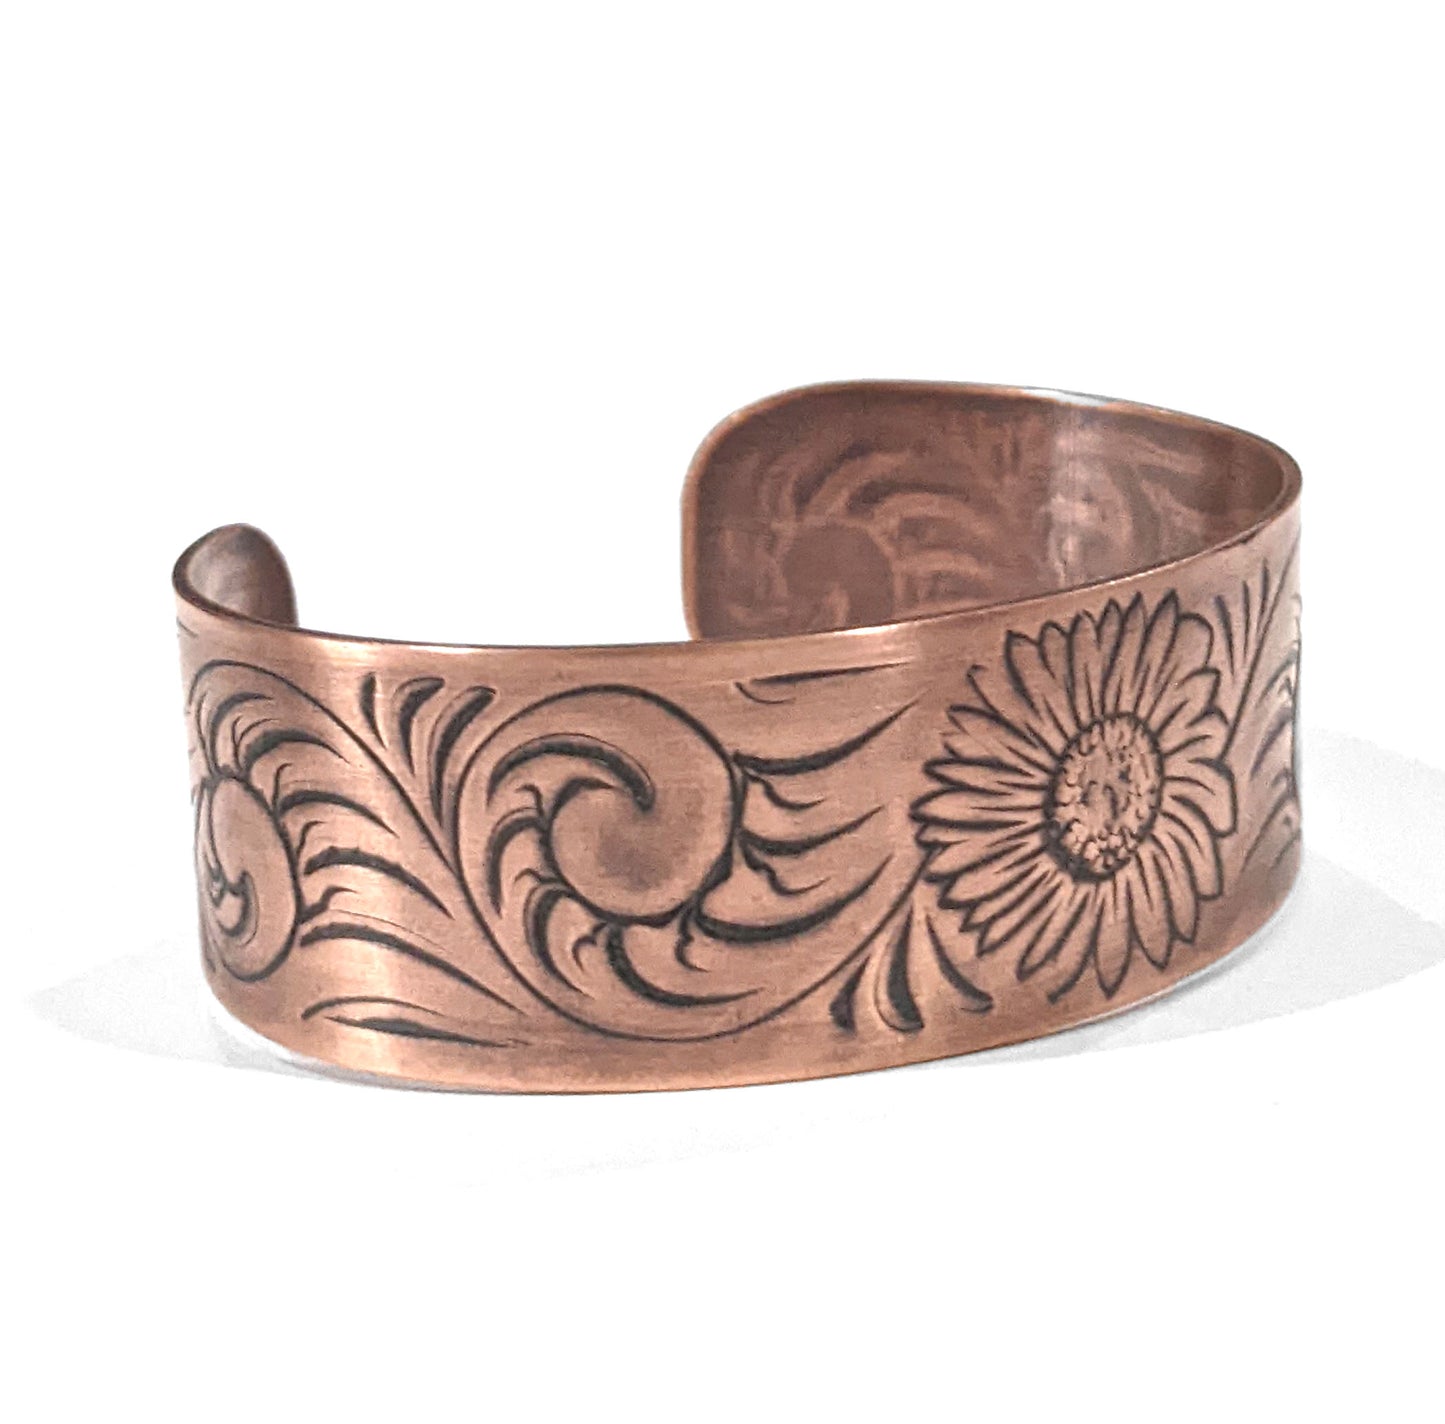 Copper cuff bracelet with a sunflower in the middle , surrounded by abstract flourish swirls. Side view showing the flourish design.